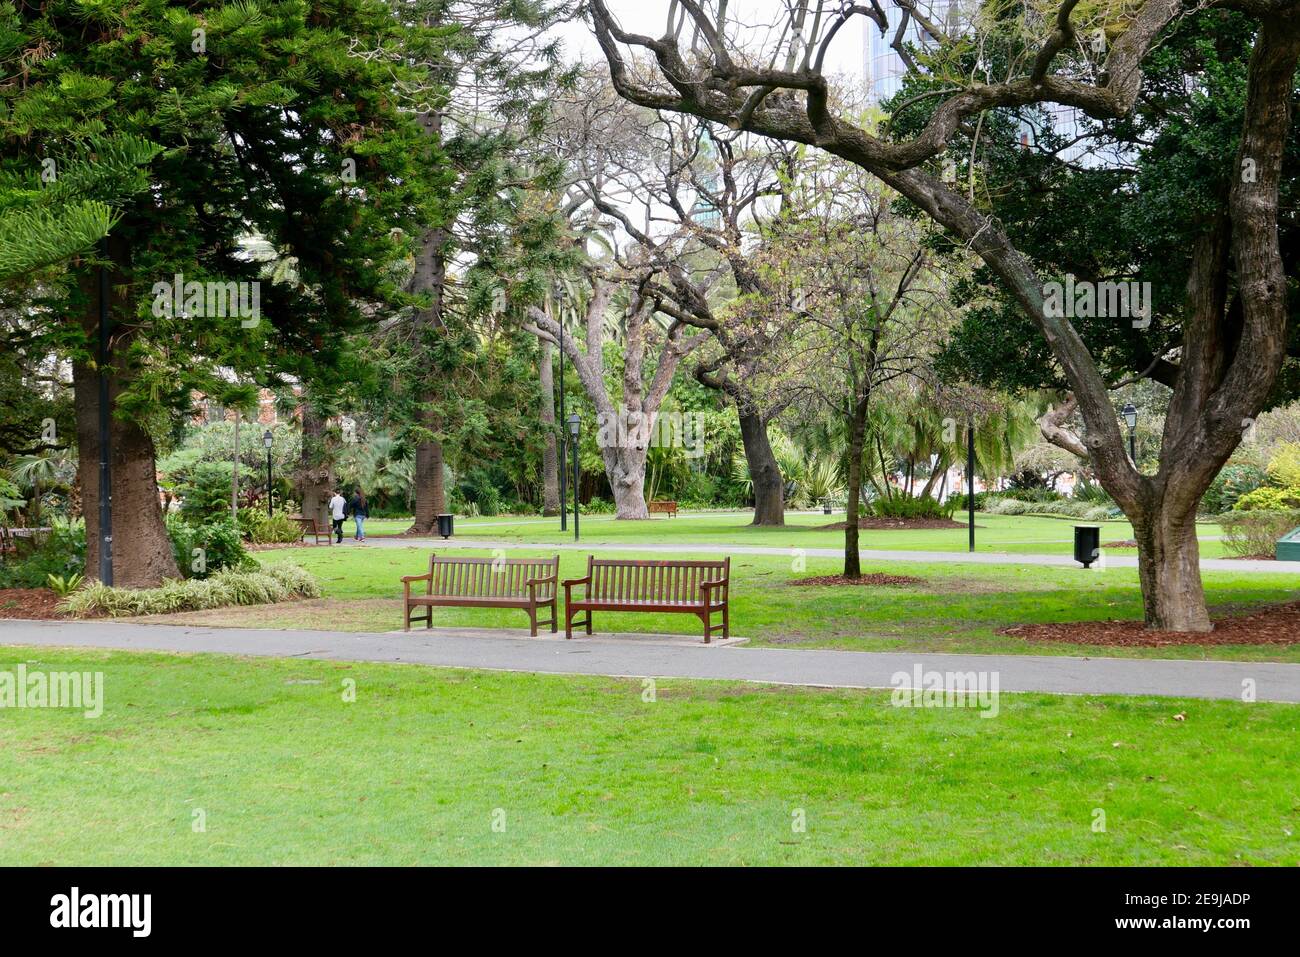 Park benches in a park in Perth, Western Australia Stock Photo - Alamy